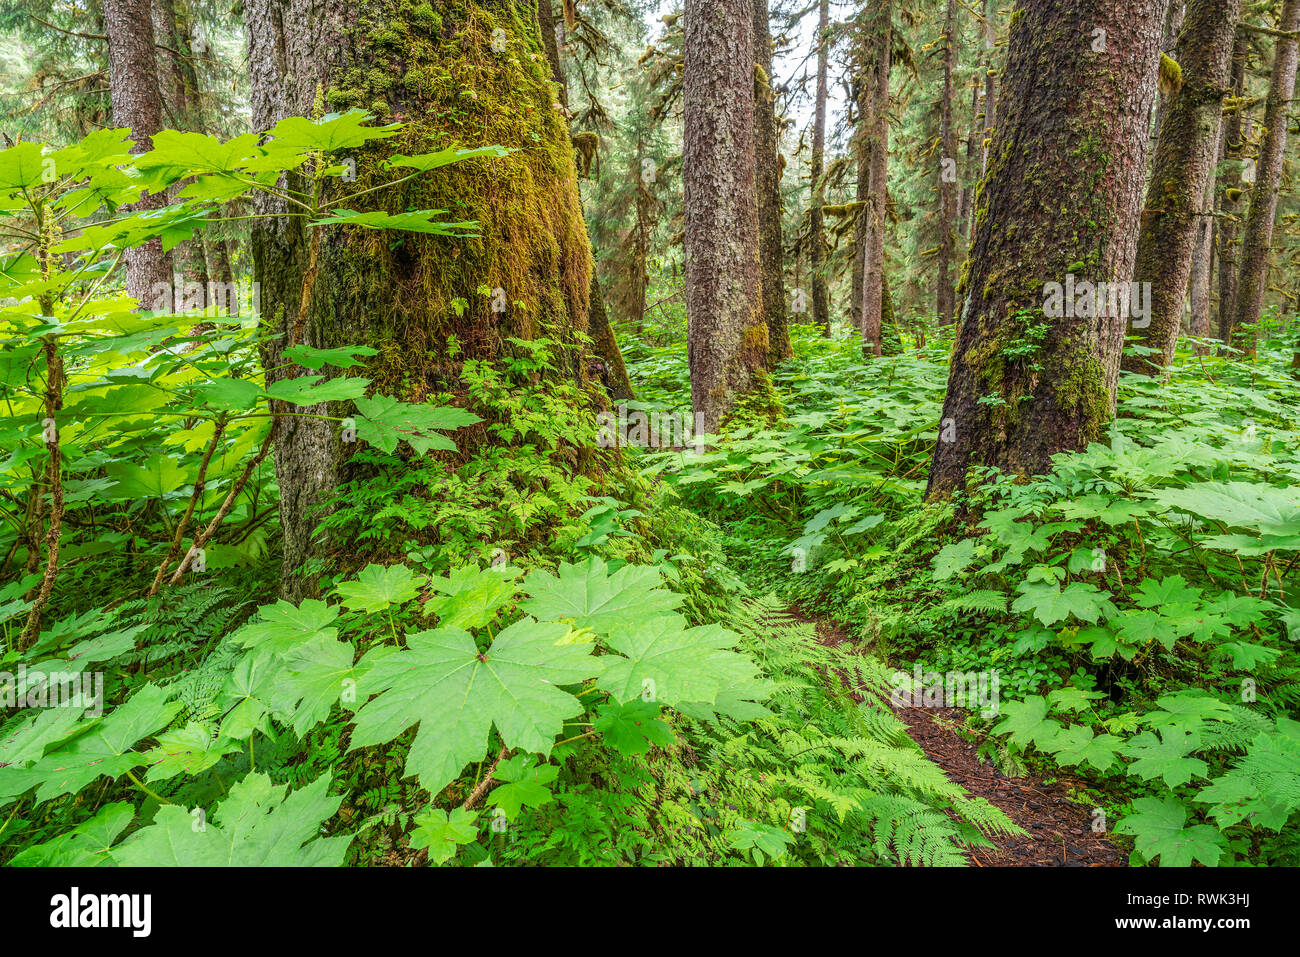 Old growth forest and understory, Tongass National Forest; Alaska, United States of America Stock Photo